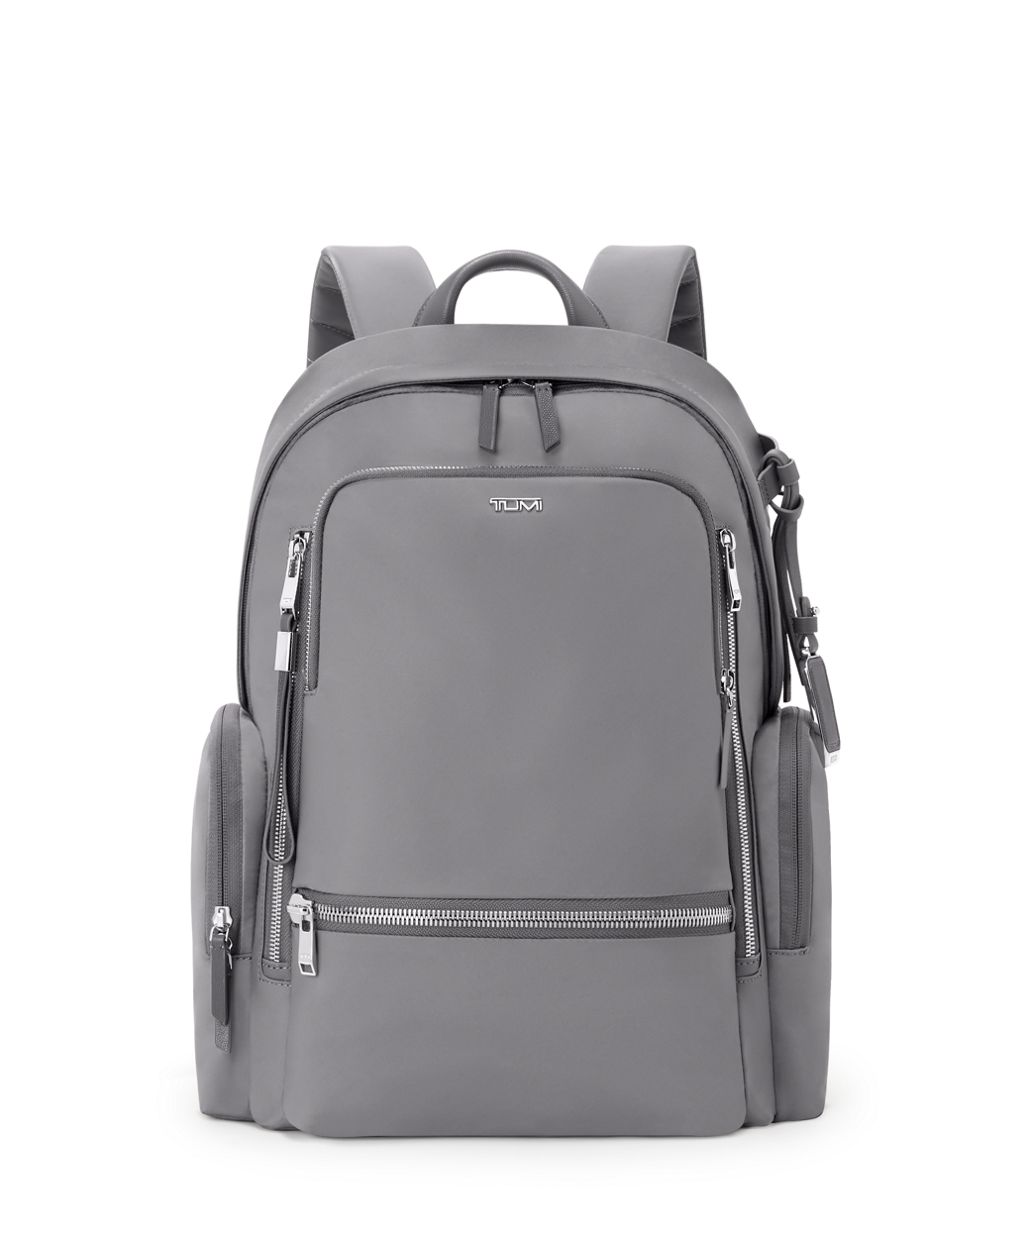 Backpacks Men Ultimates, Recent collections